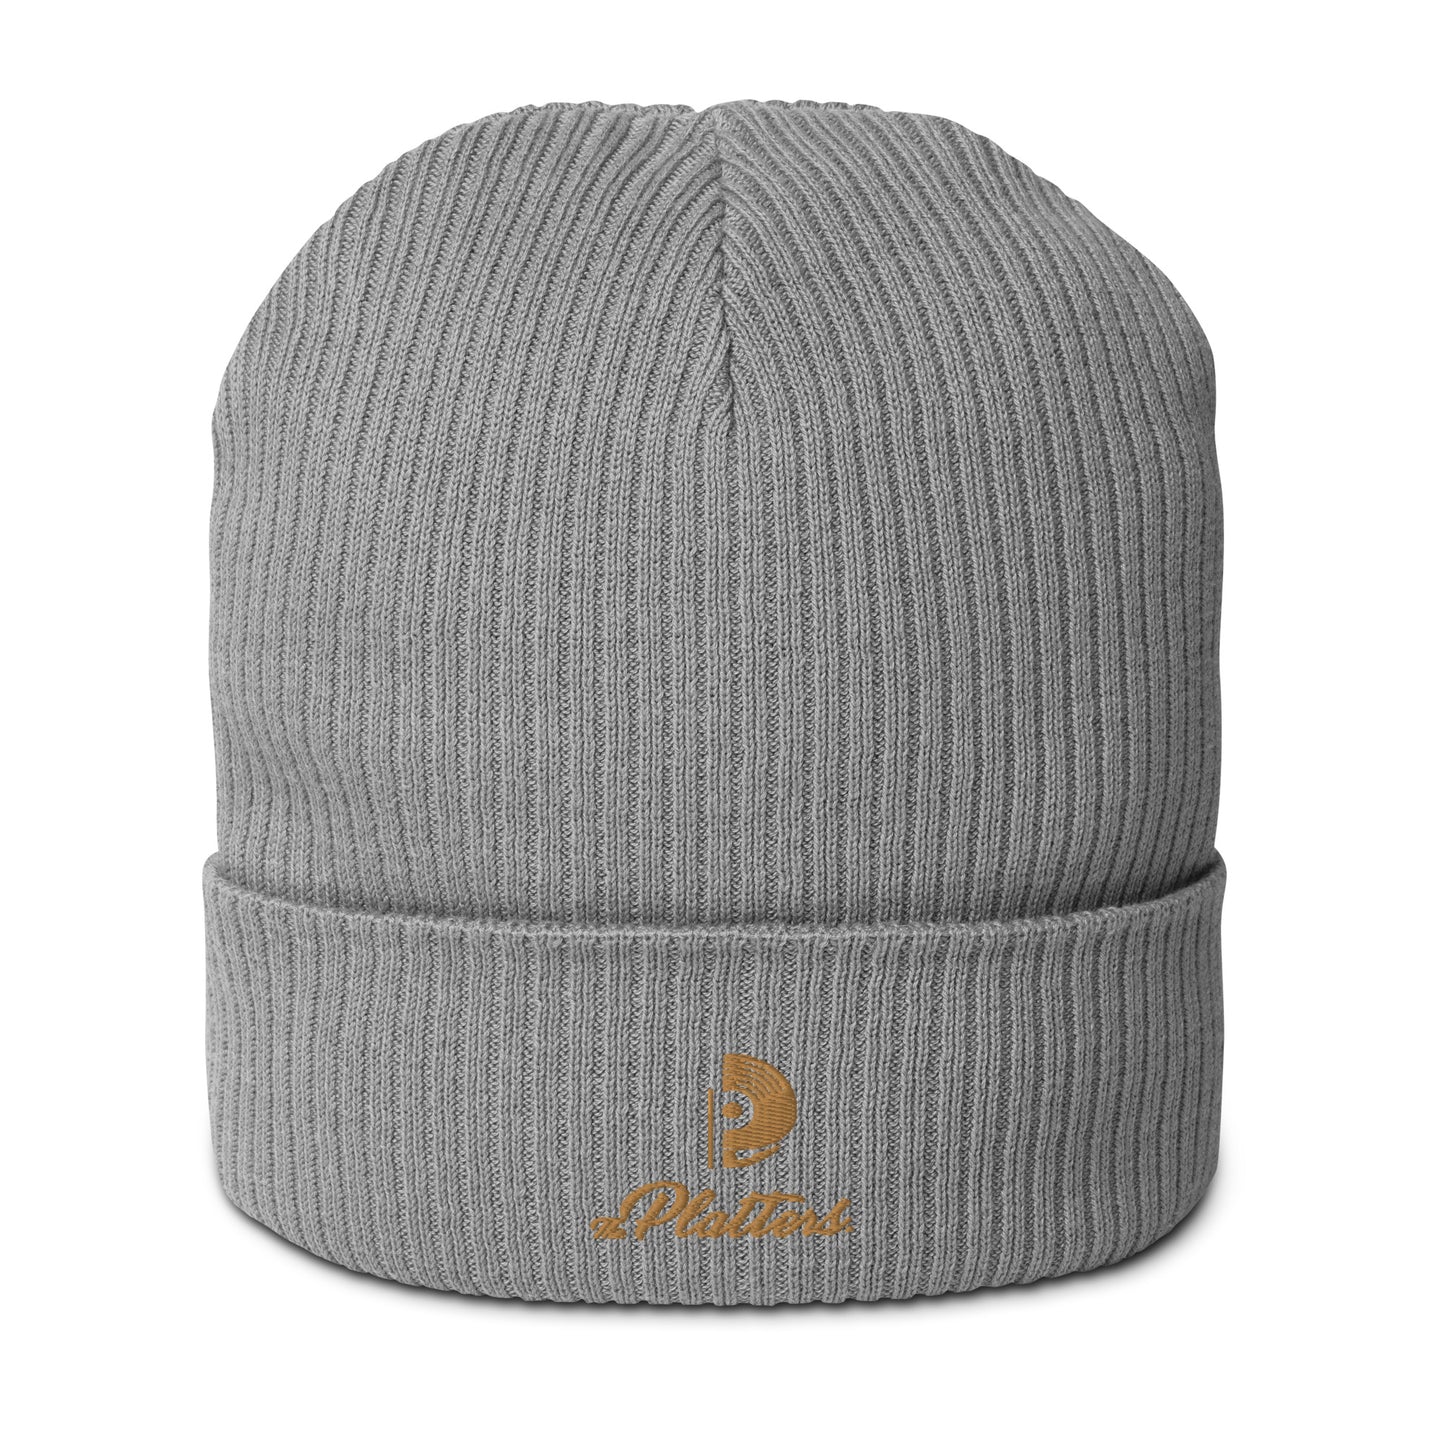 The Platters®️ Organic Ribbed Beanie